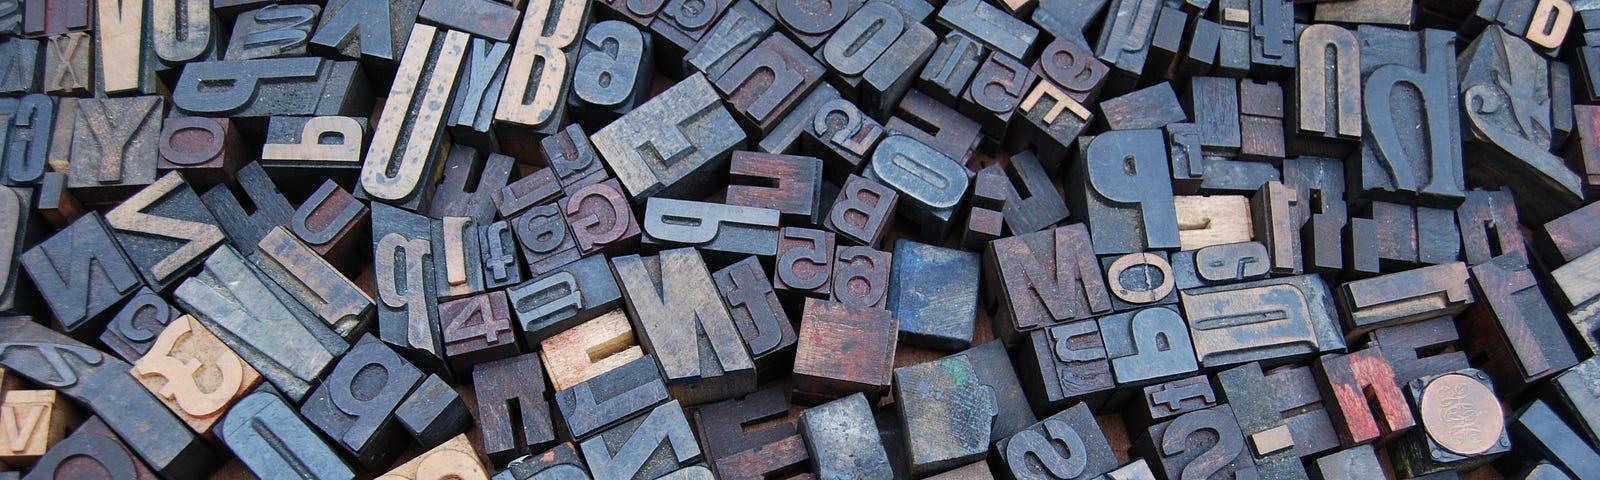 this is a photo of wooden blocks that consist of letters.